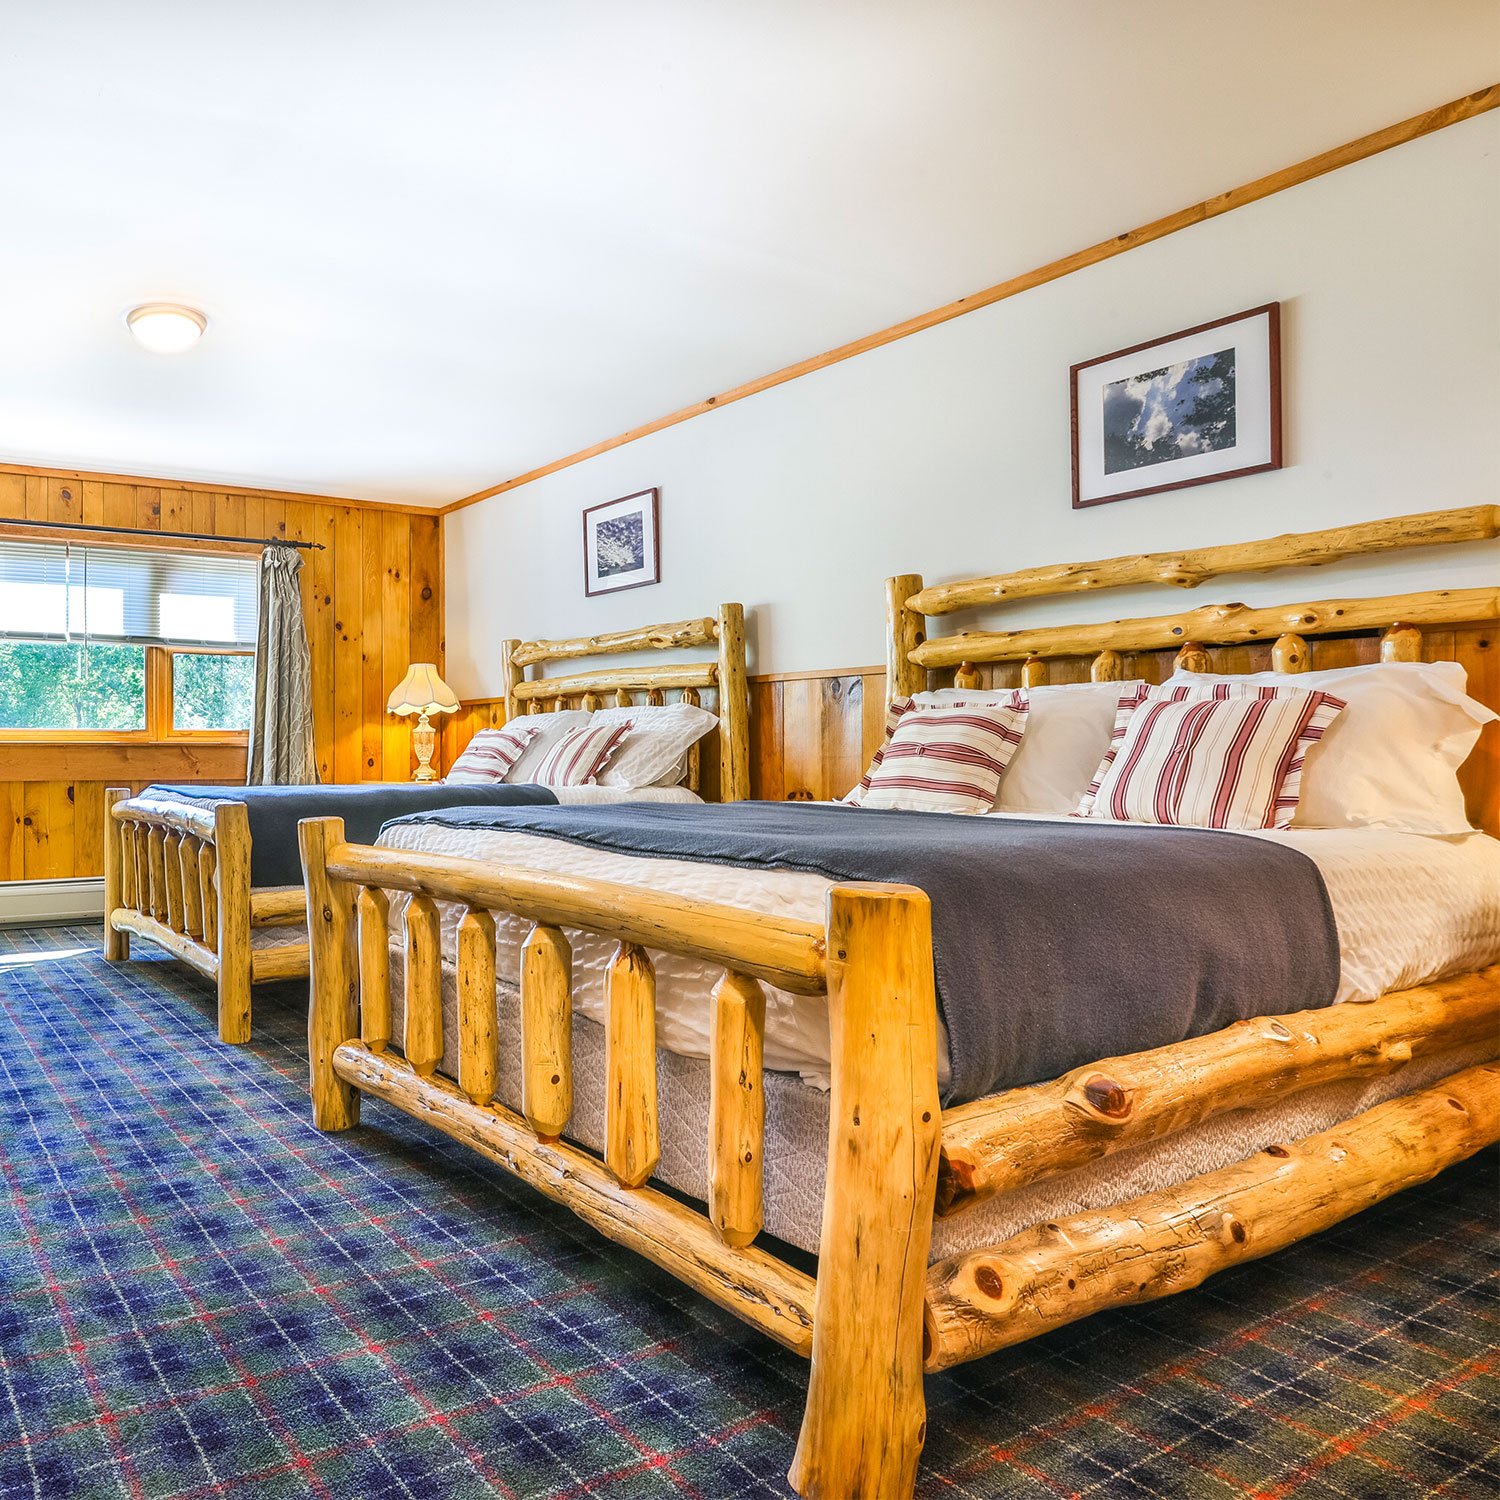 STAY_HOTEL_GORE MOUNTAIN & SCHROON LAKE AREA_NORTH RIVER_Garnet Hill Lodge_Room2.jpeg